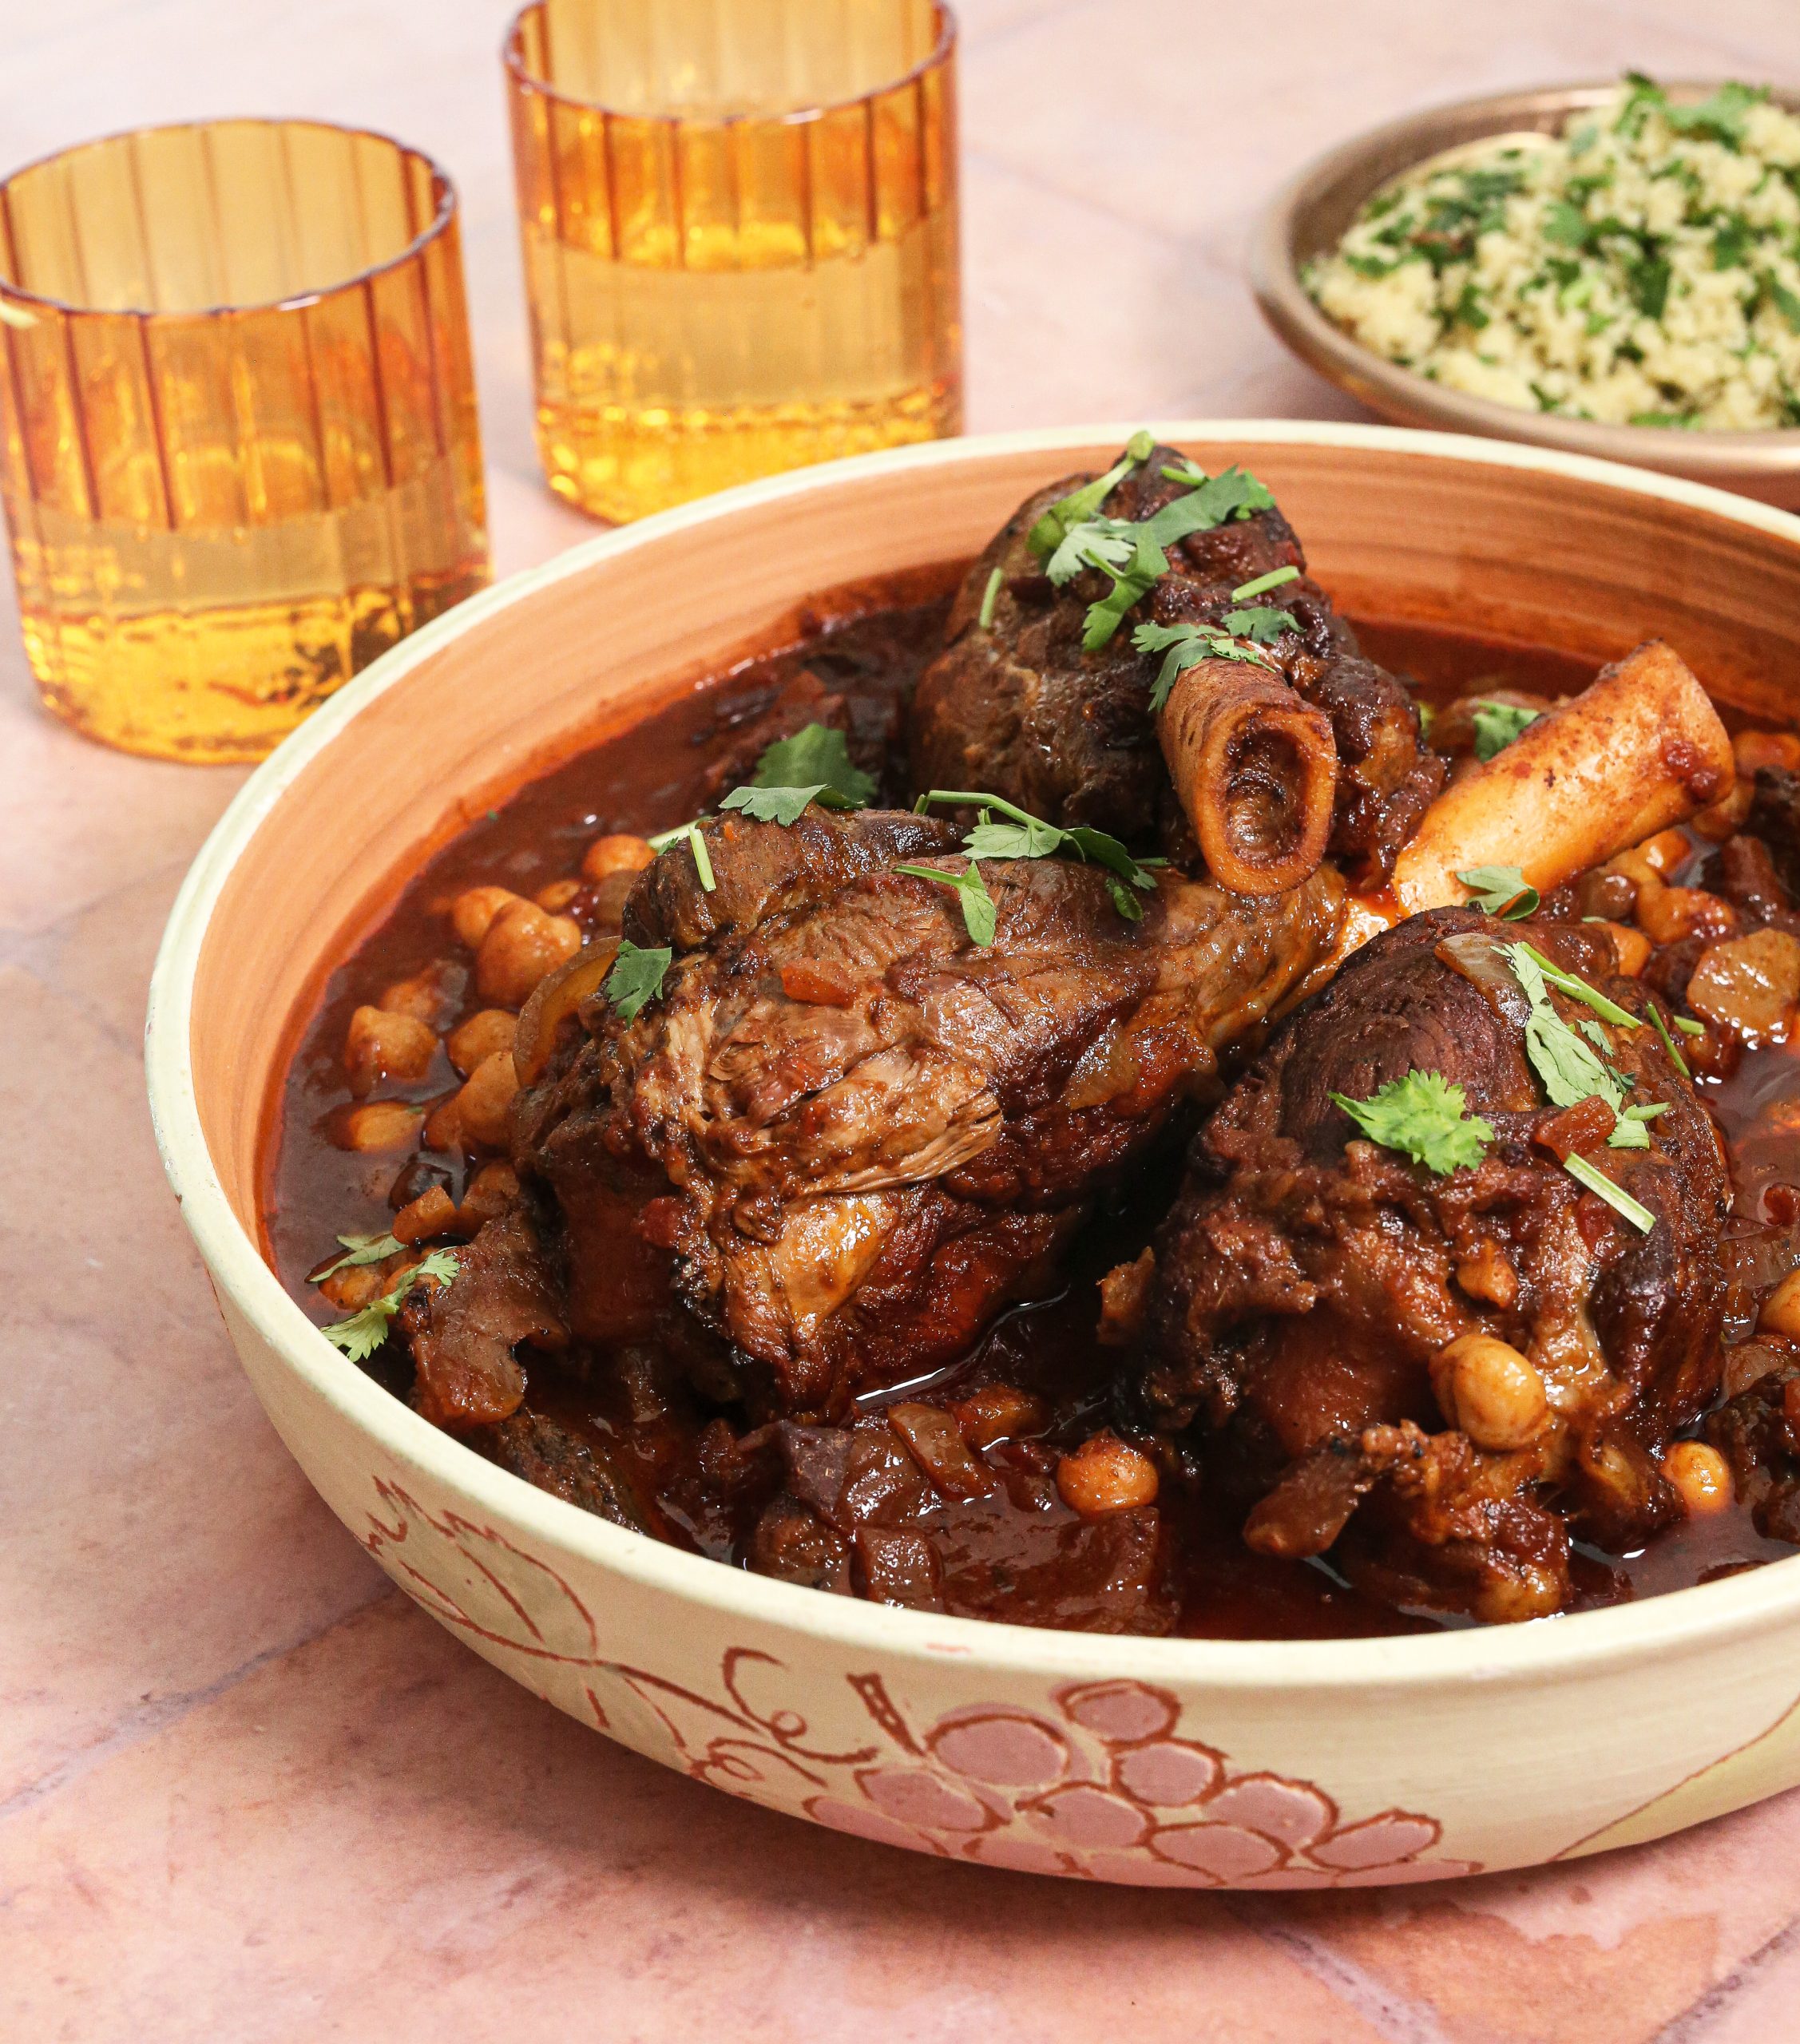 Slow-cooked Moroccan lamb shanks